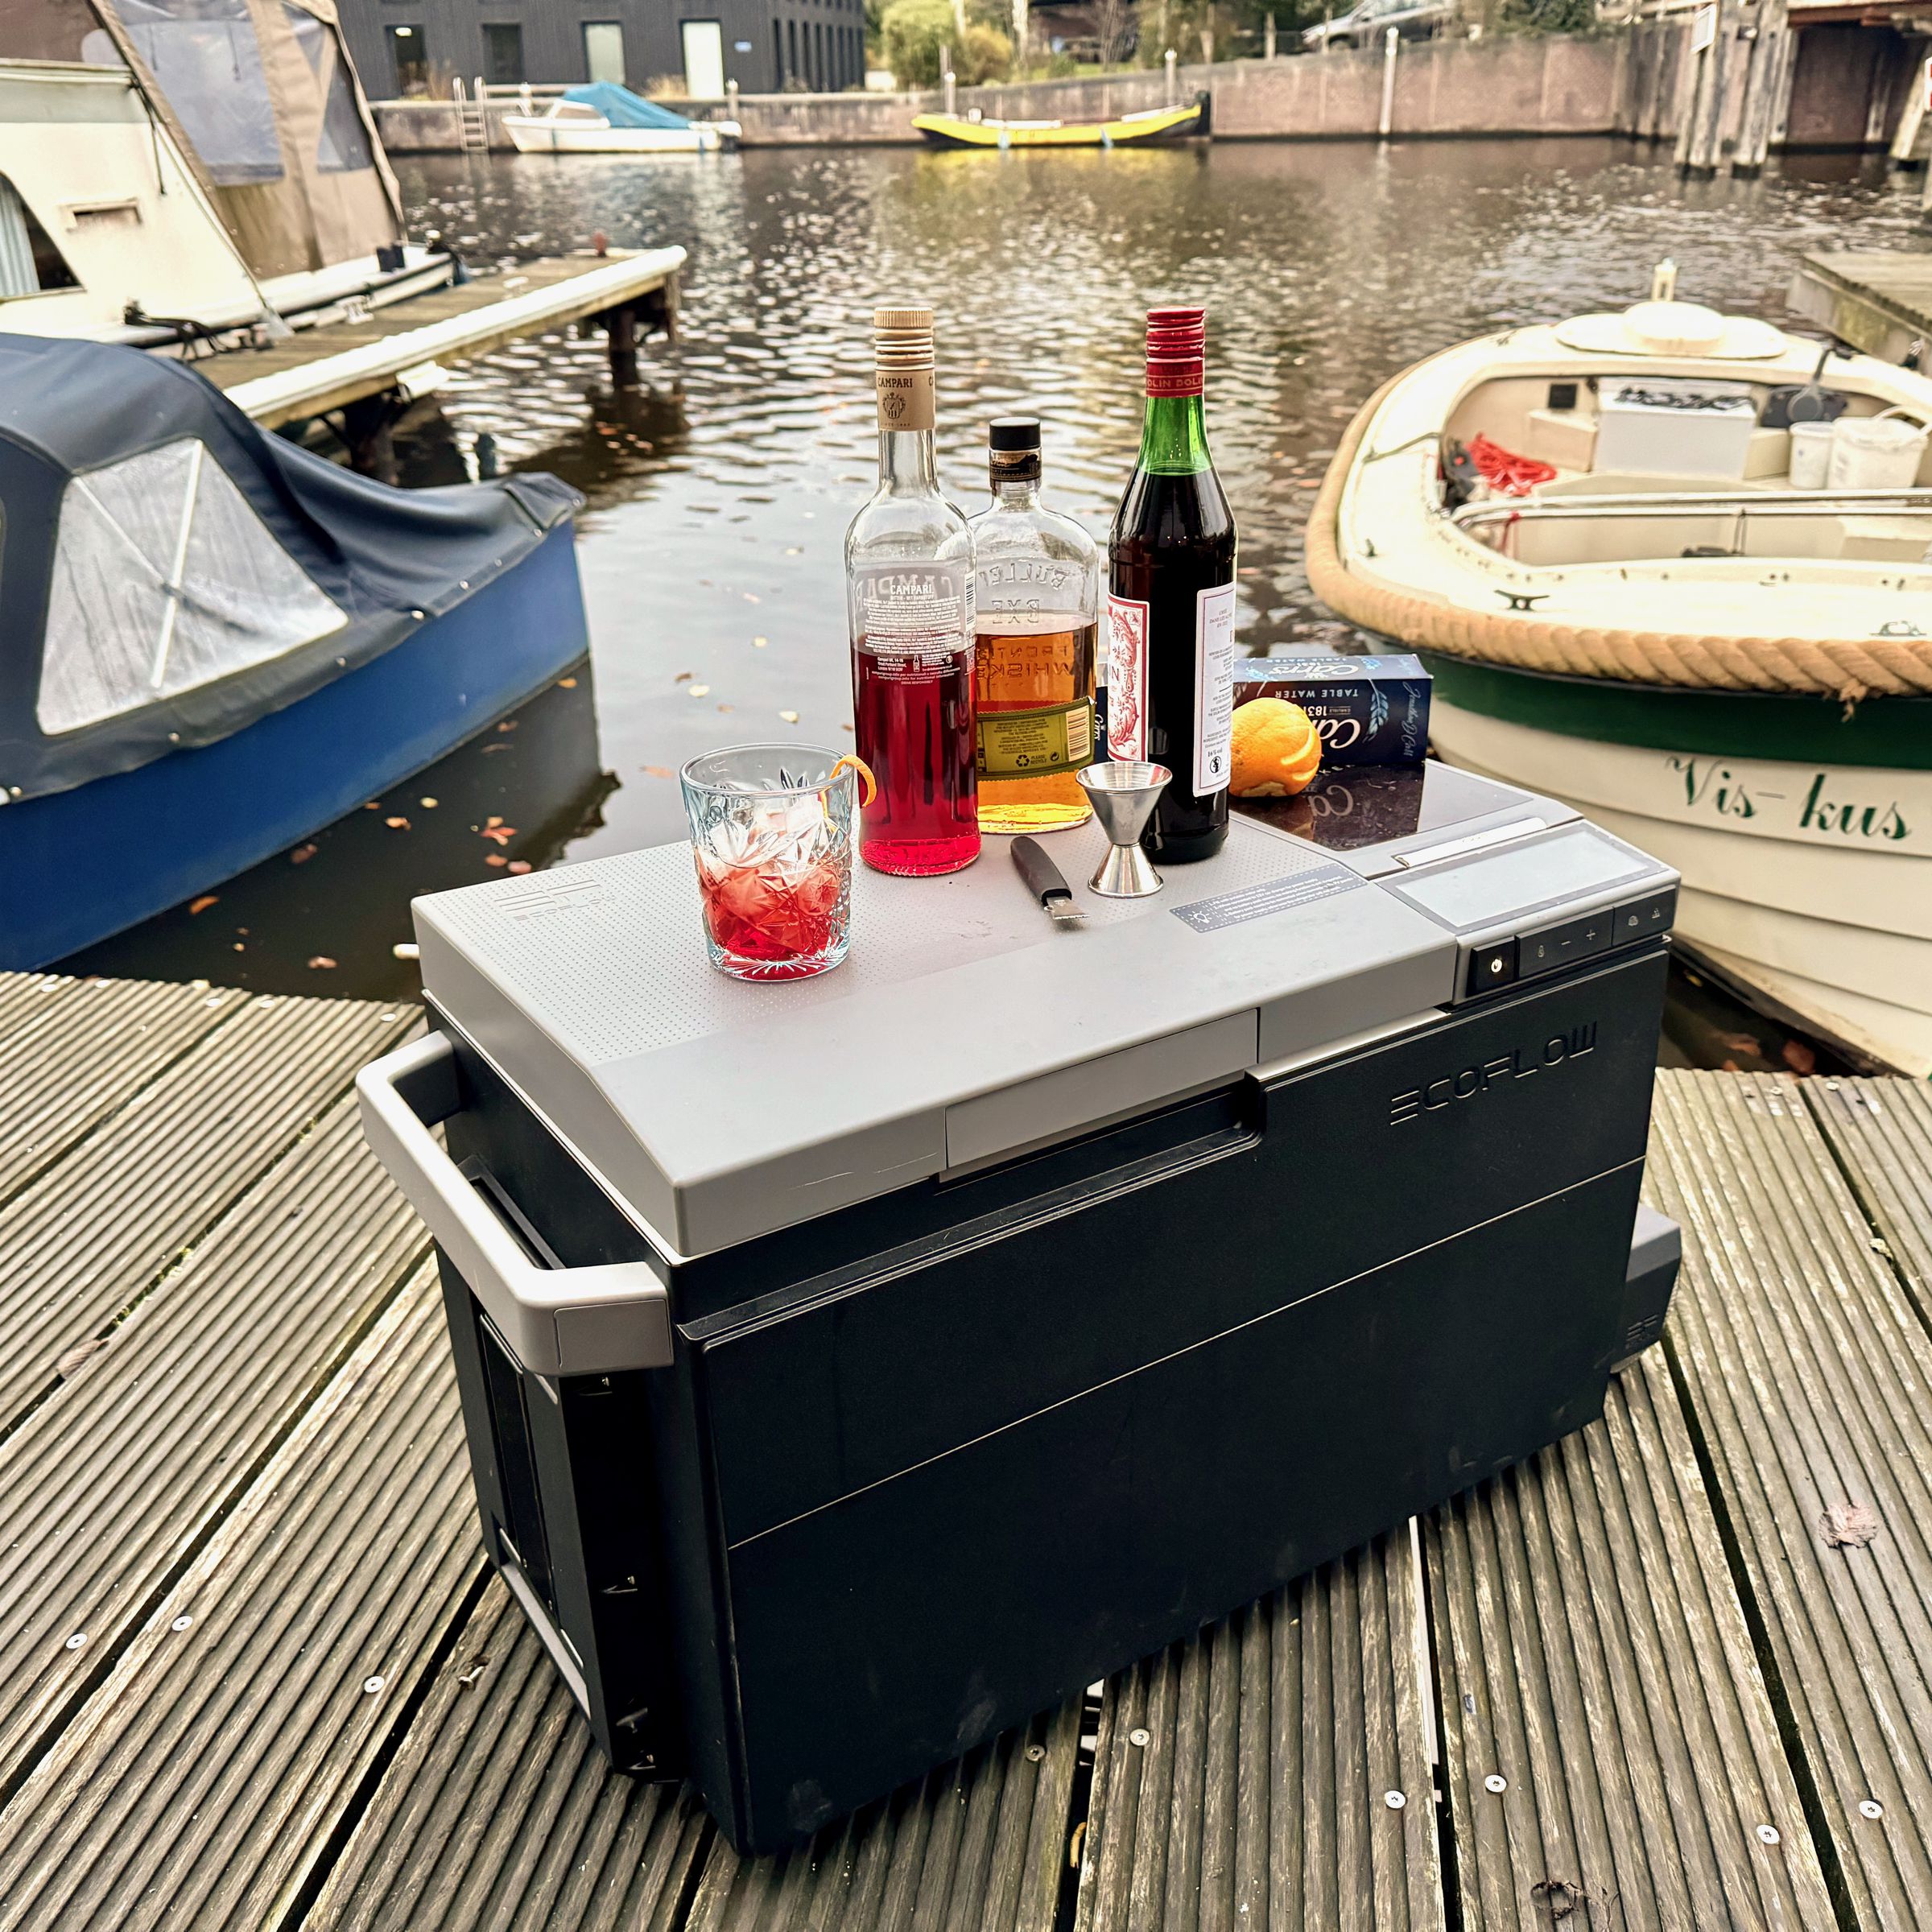 EcoFlow Glacier sits on a dock with boats in the background. On top of the closed lid are ingredients to make a boulevardier cocktail.